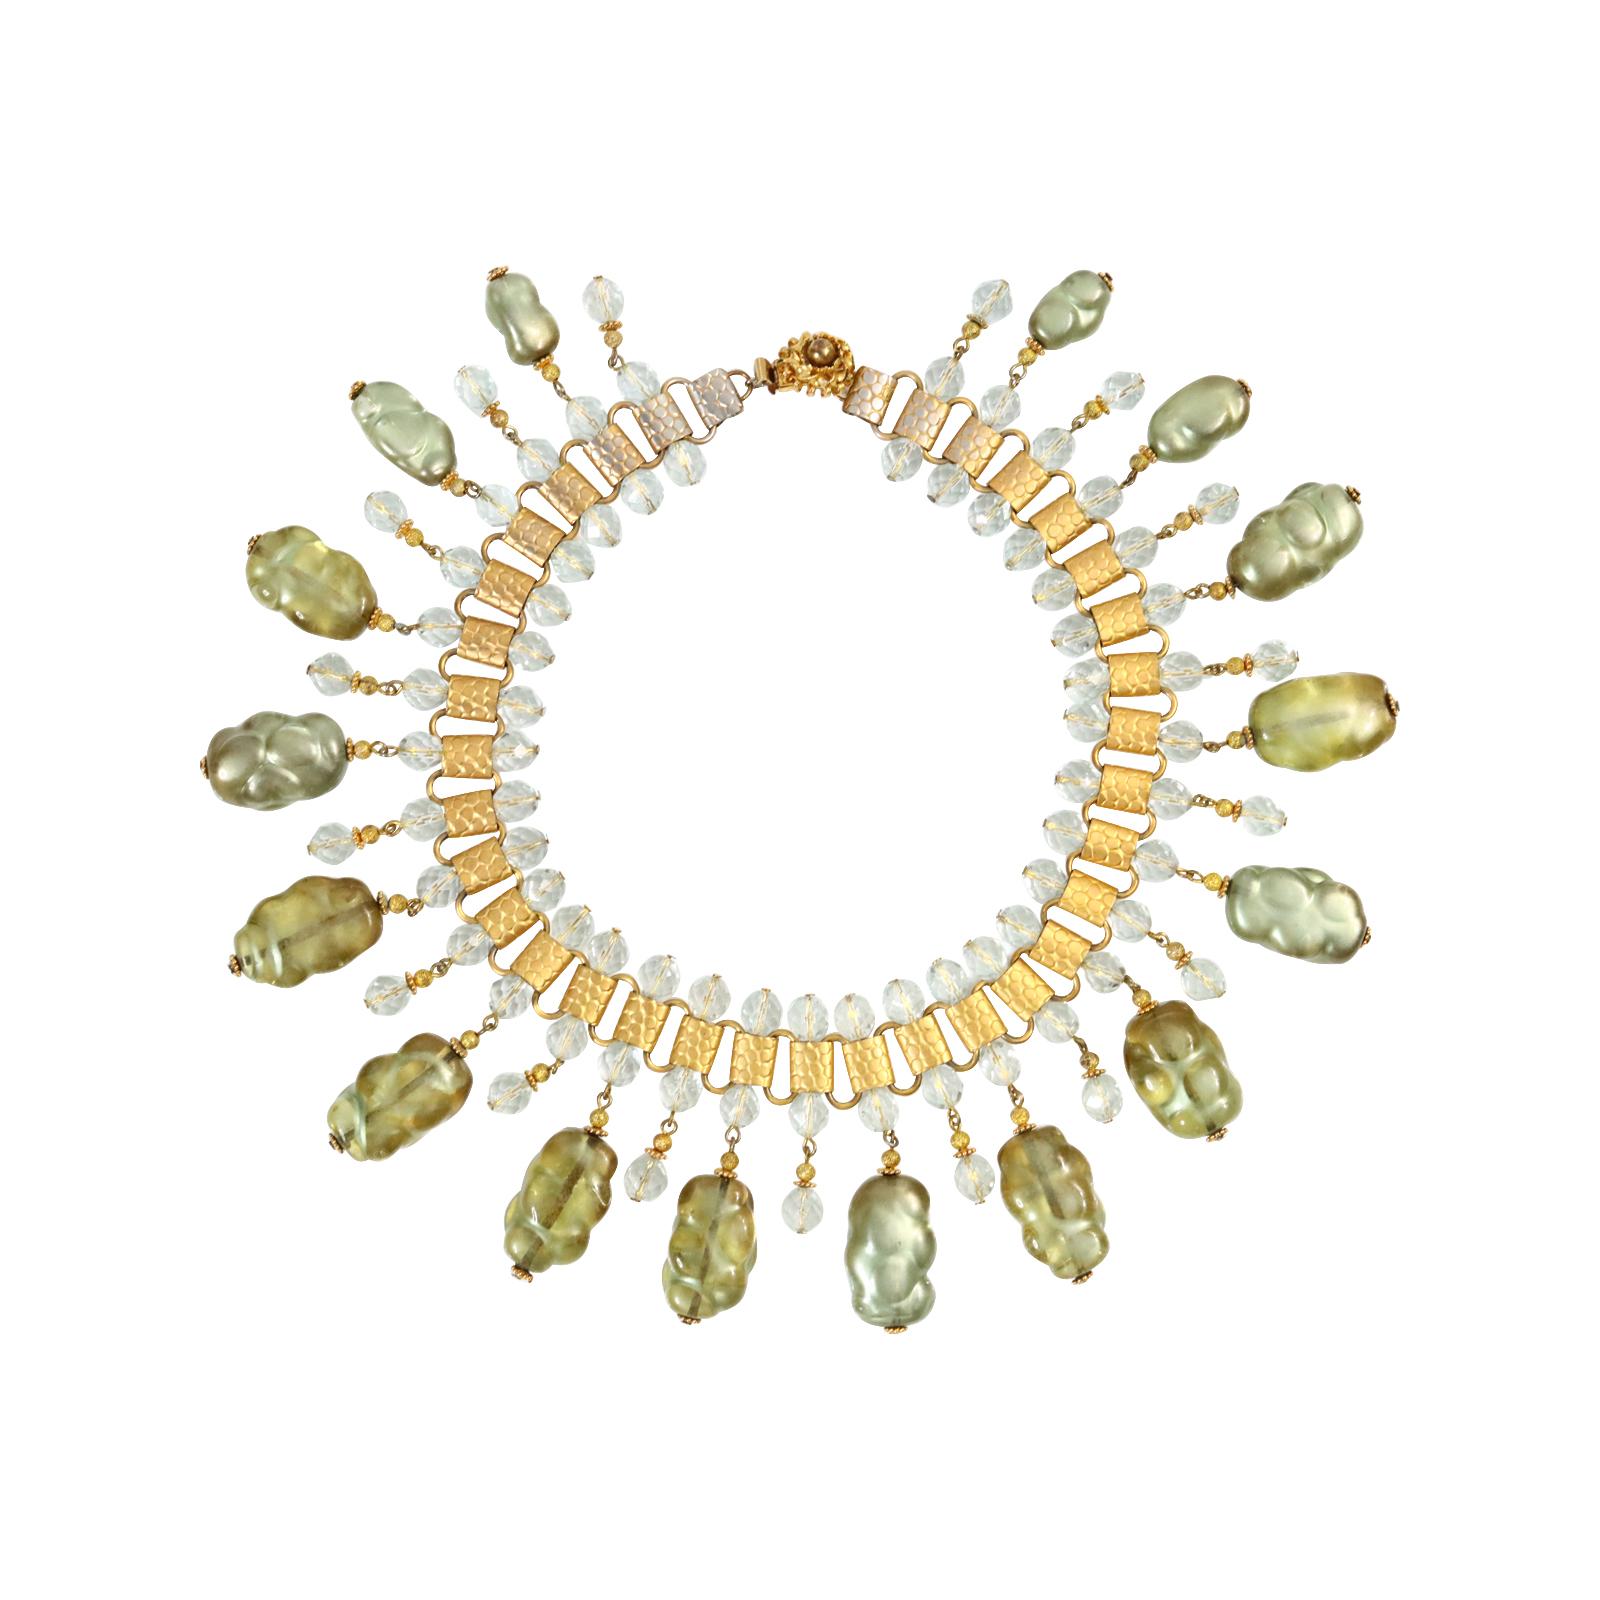 Vintage deLillo Gold Tone with Light Green Dangling Beads Necklace, circa 1970s For Sale 2